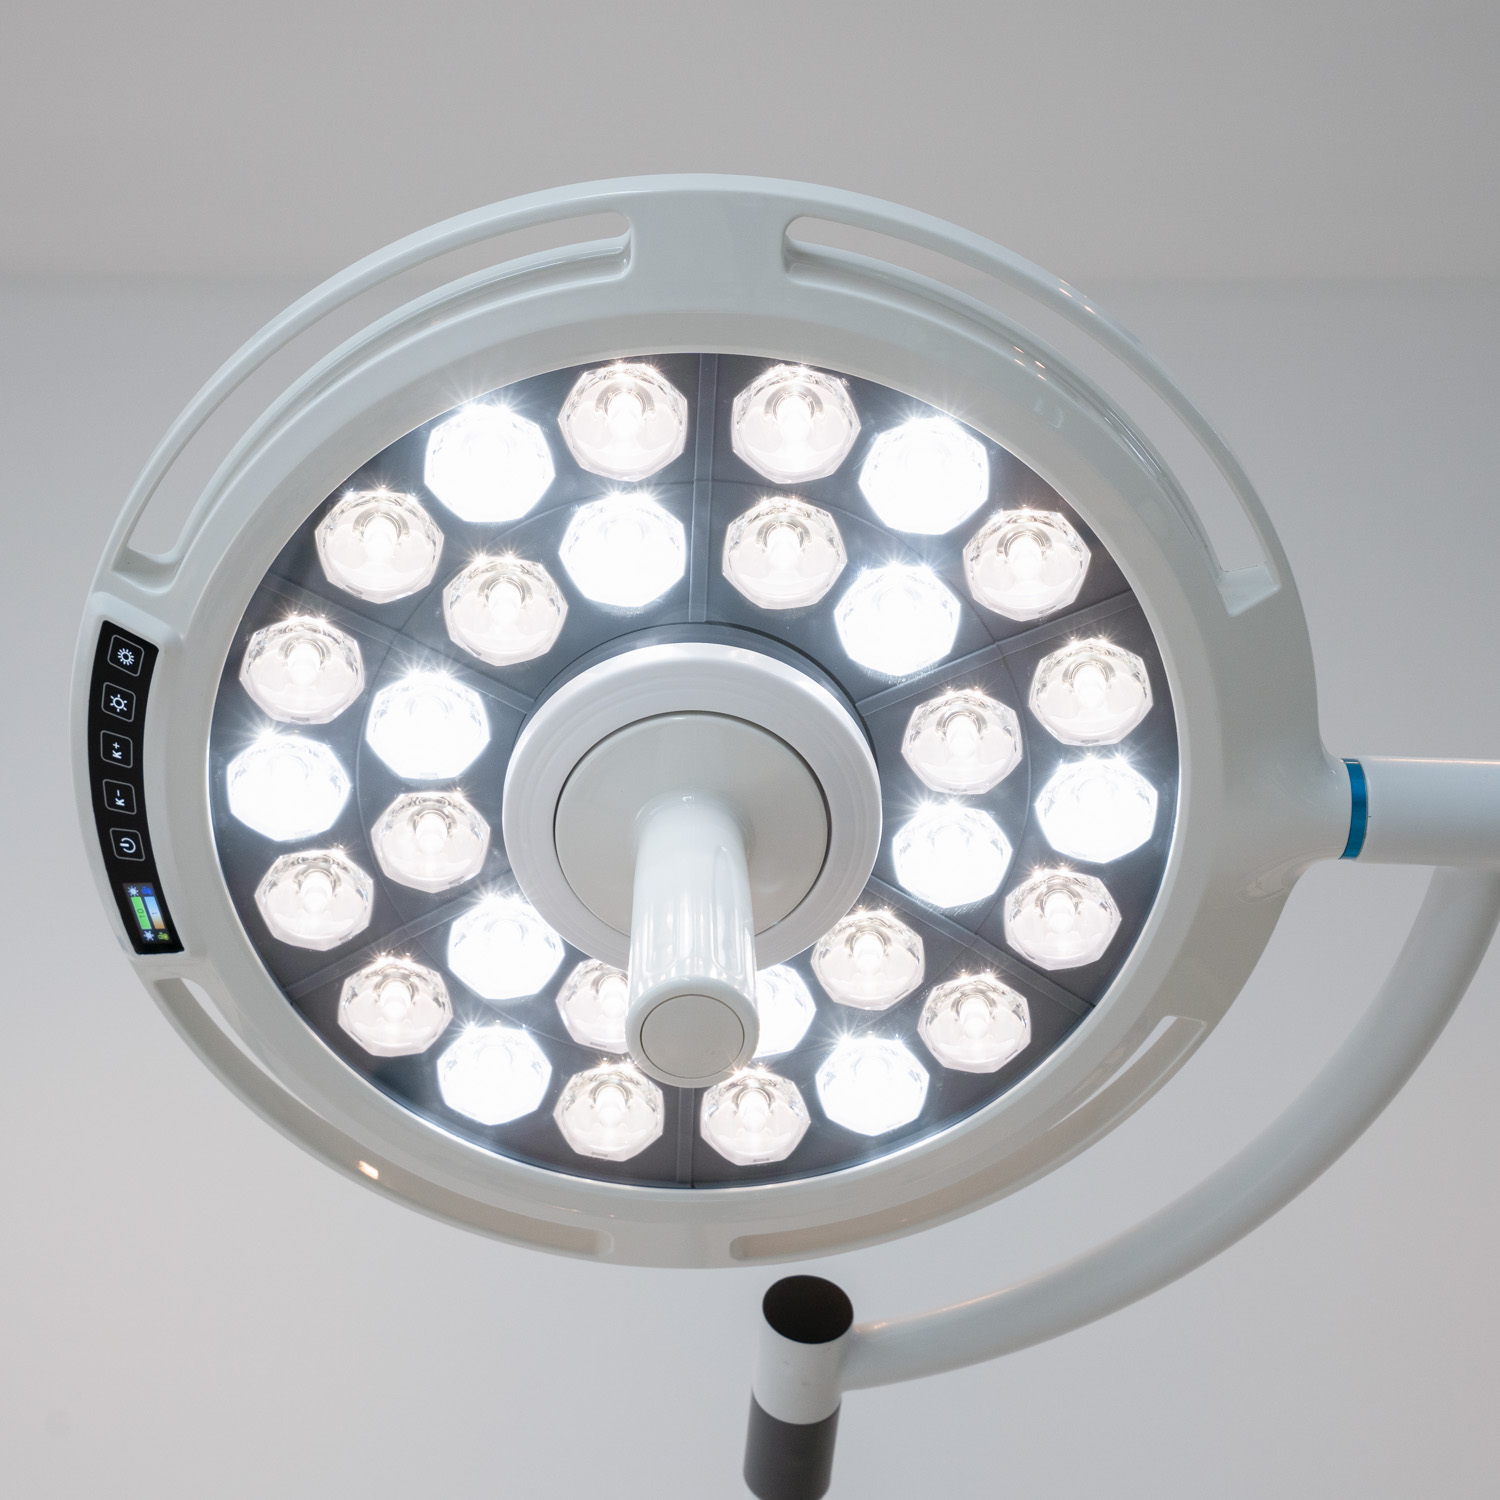 Surgical Light JD1700,JD1800 and Examination light